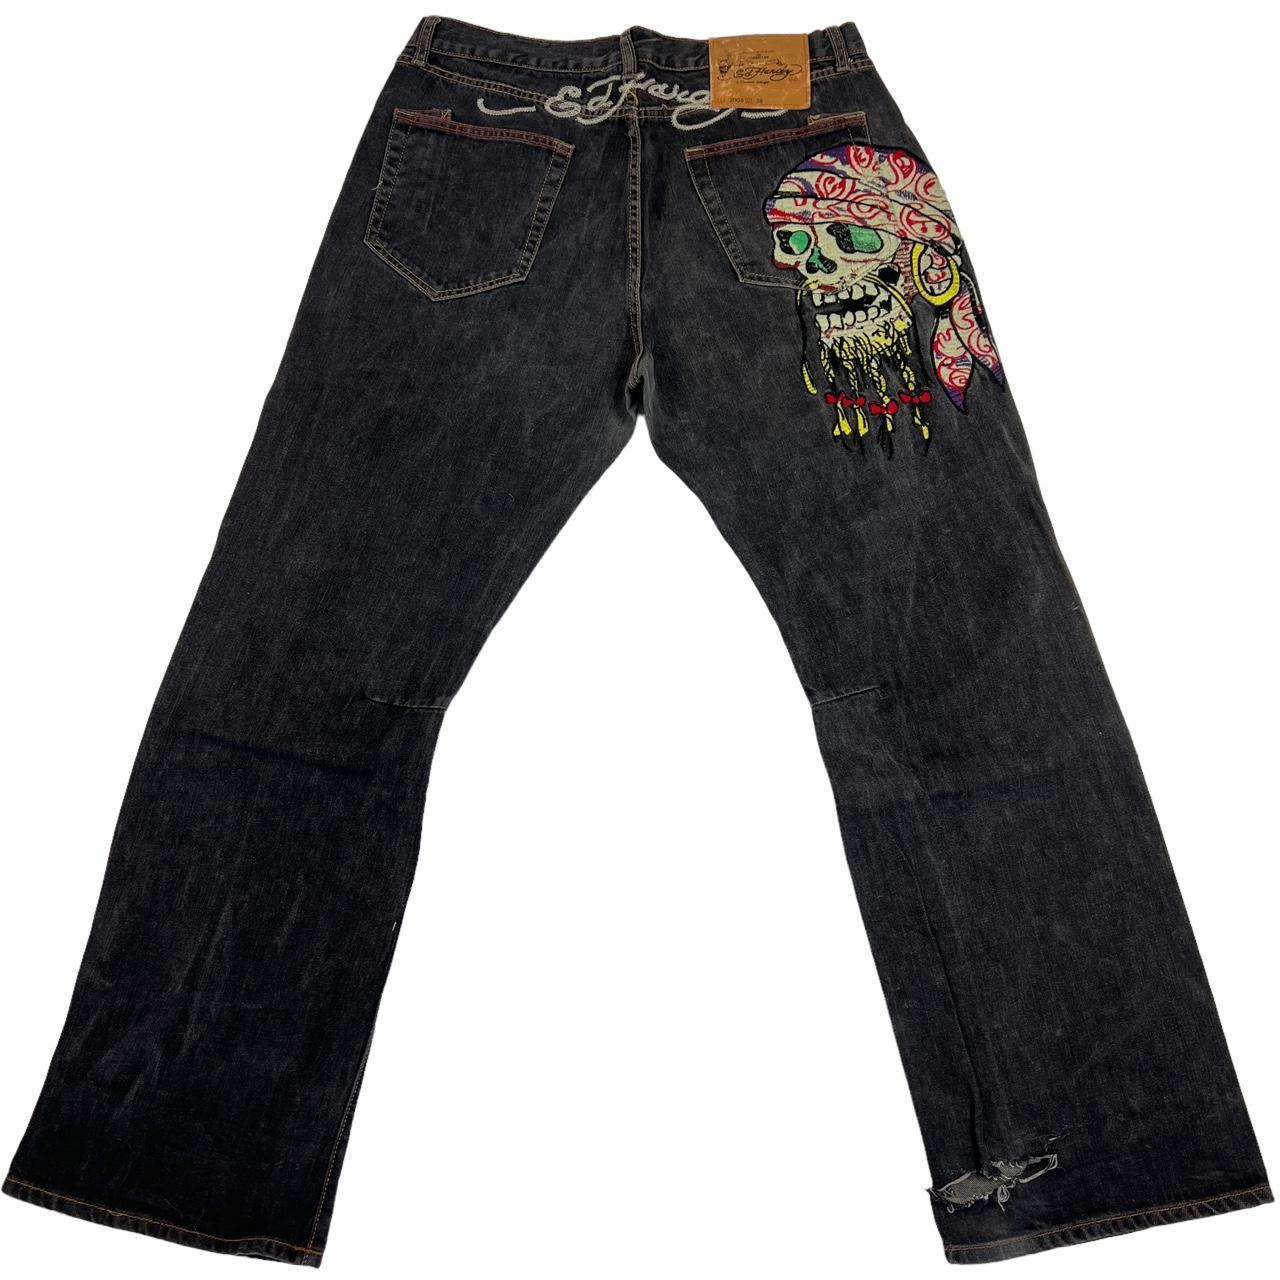 Vintage Ed Hardy Embroidered Spellout & Pirate Denim... - Depop